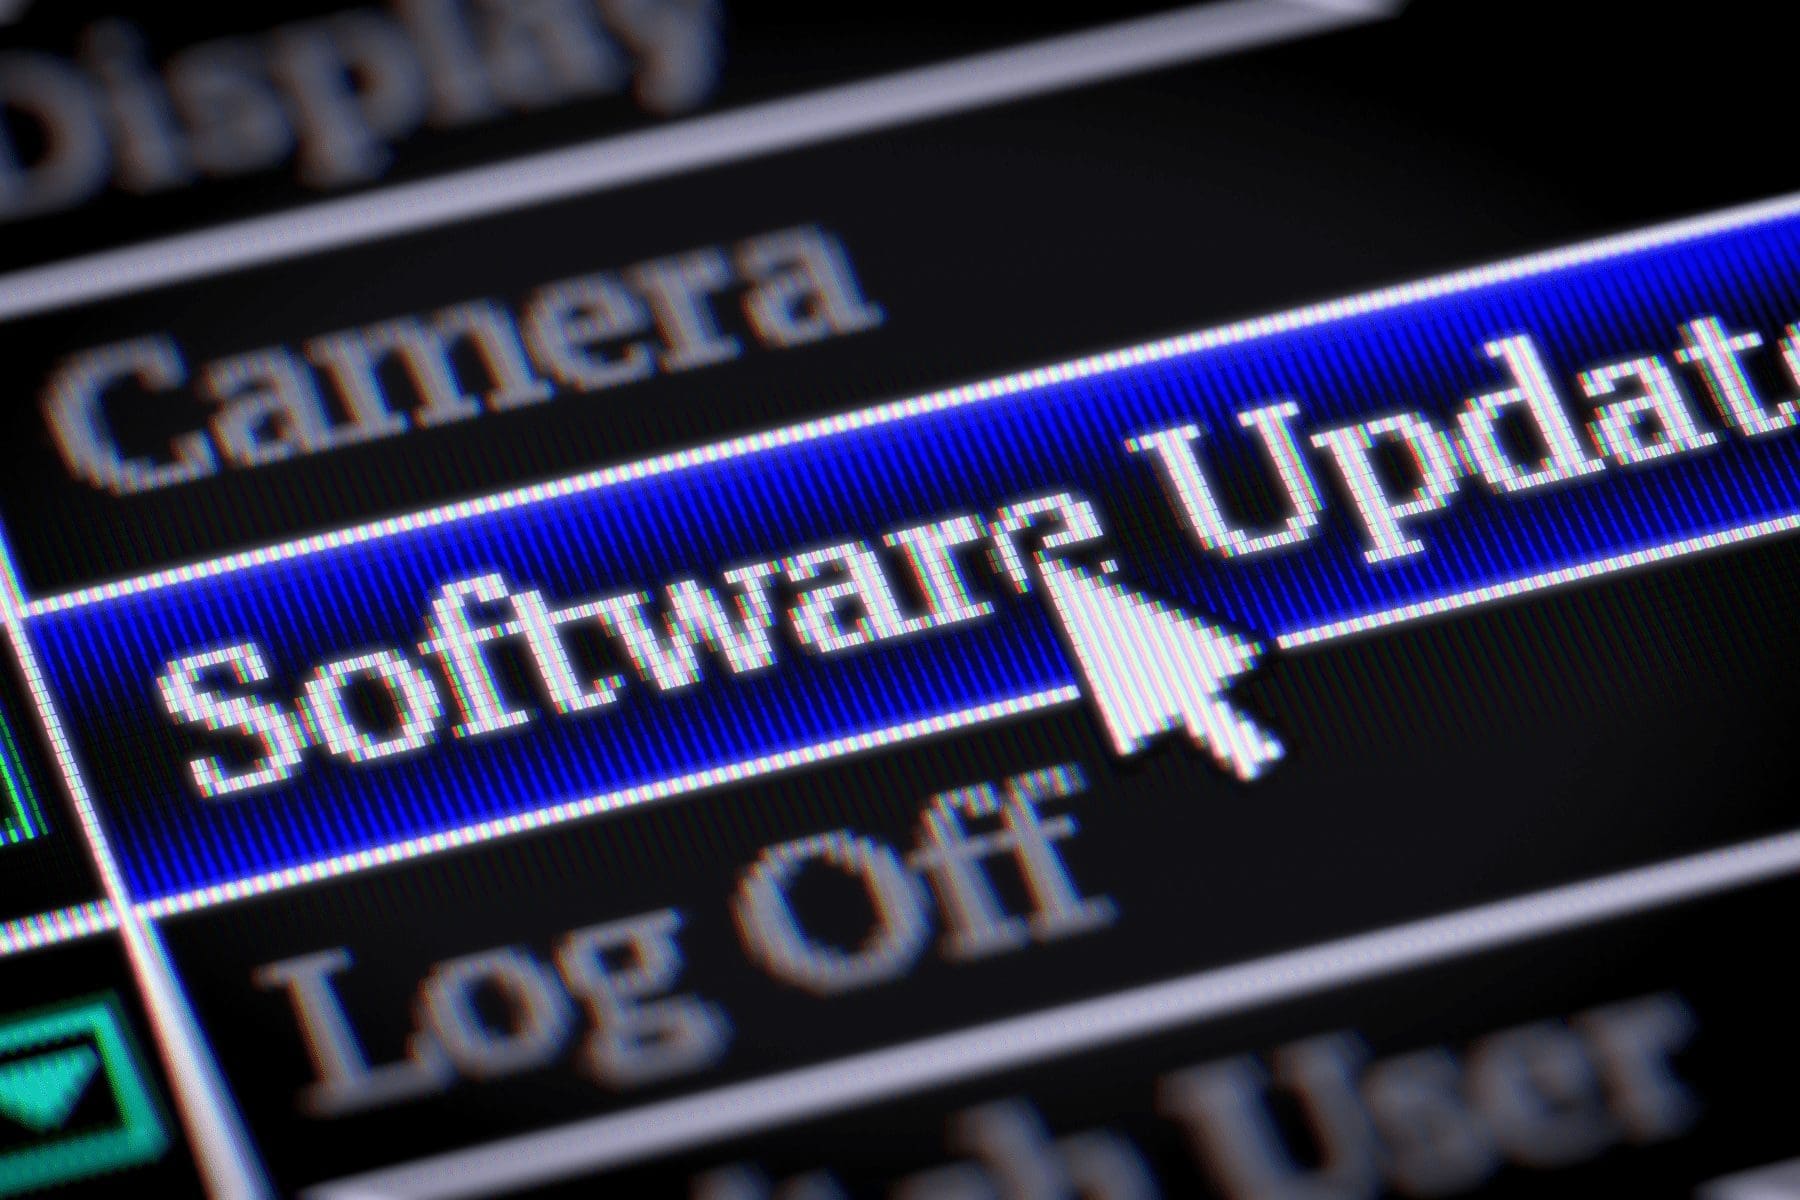 cursor on software updates which becomes a challenge during end of life software